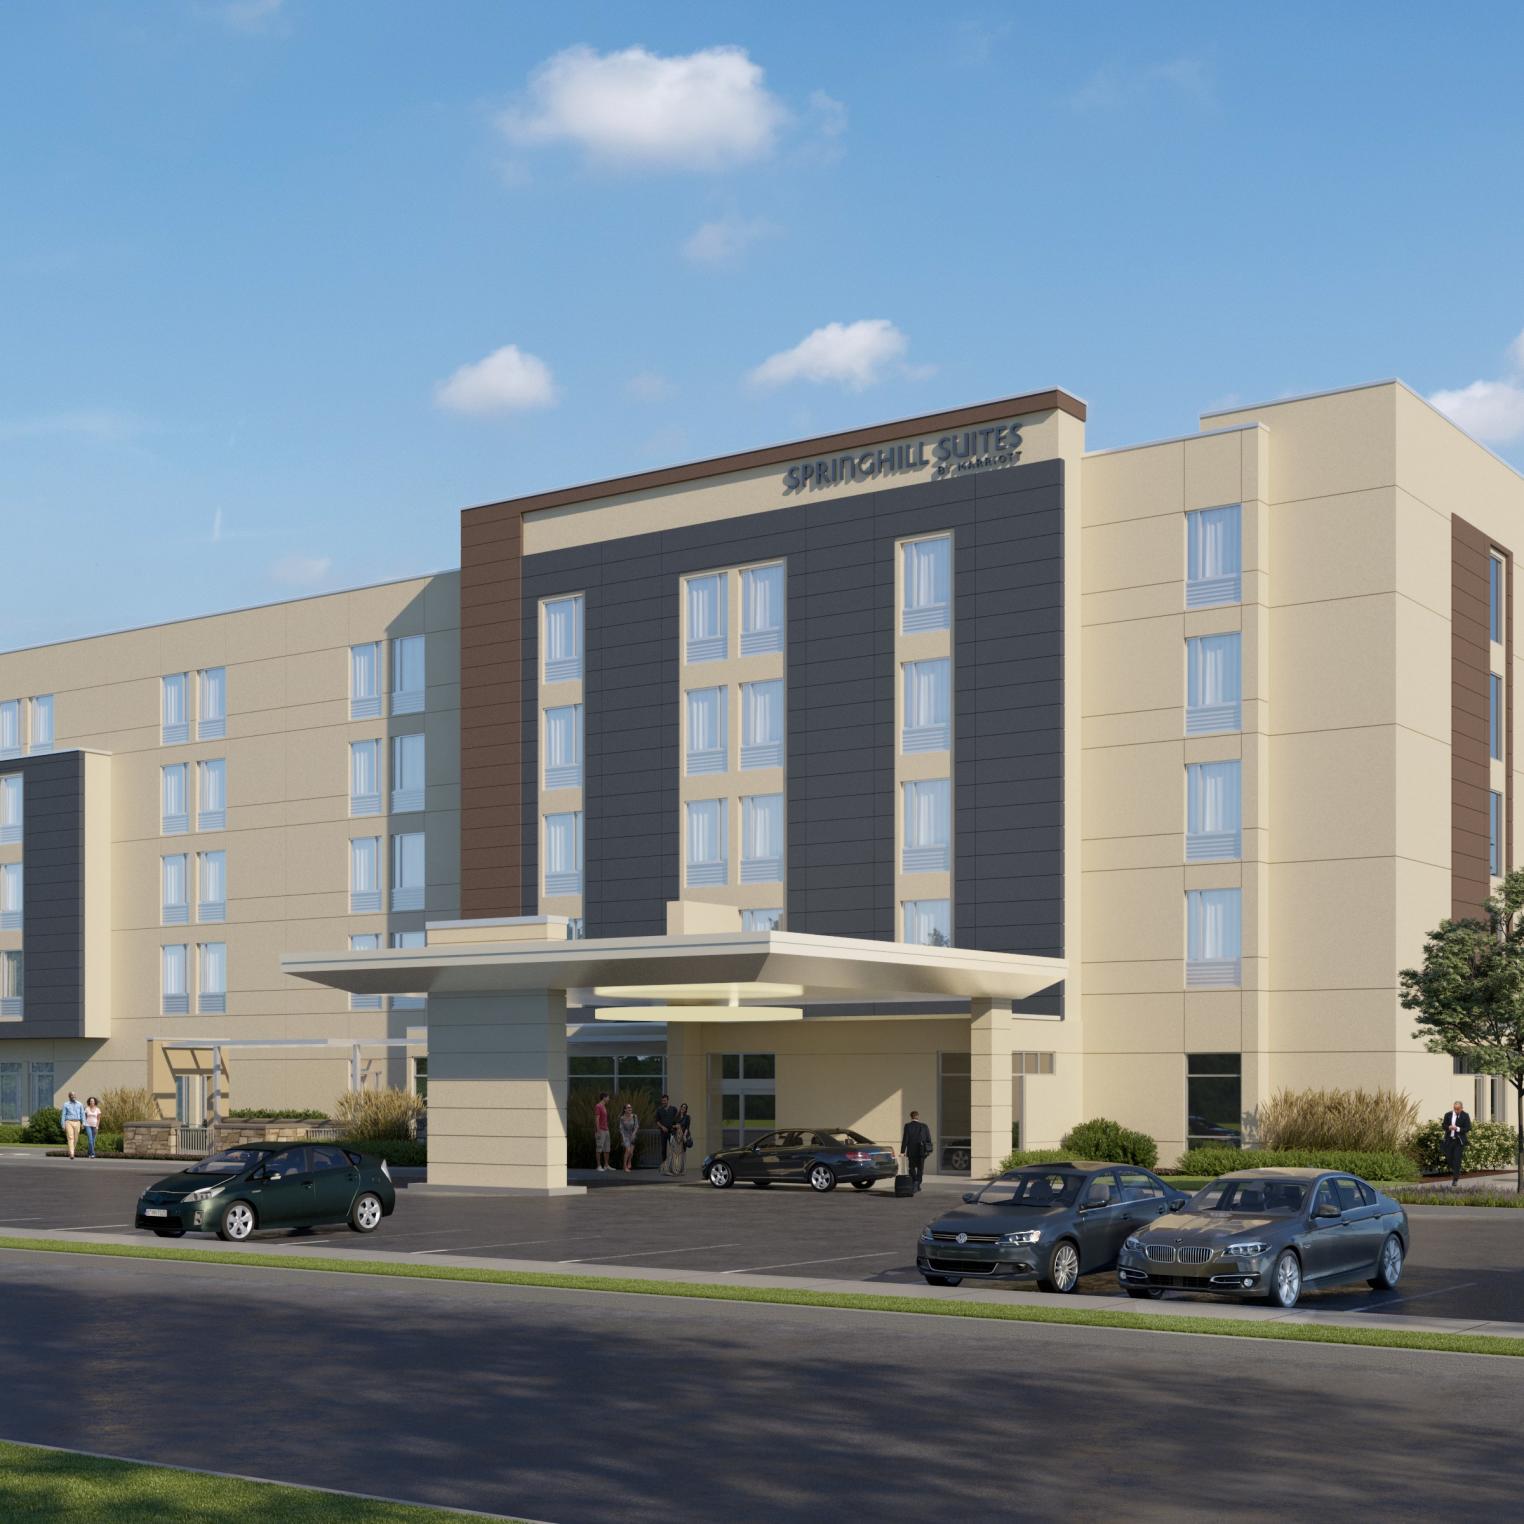 Springhill Suites by Marriott Camp Hill Rendering